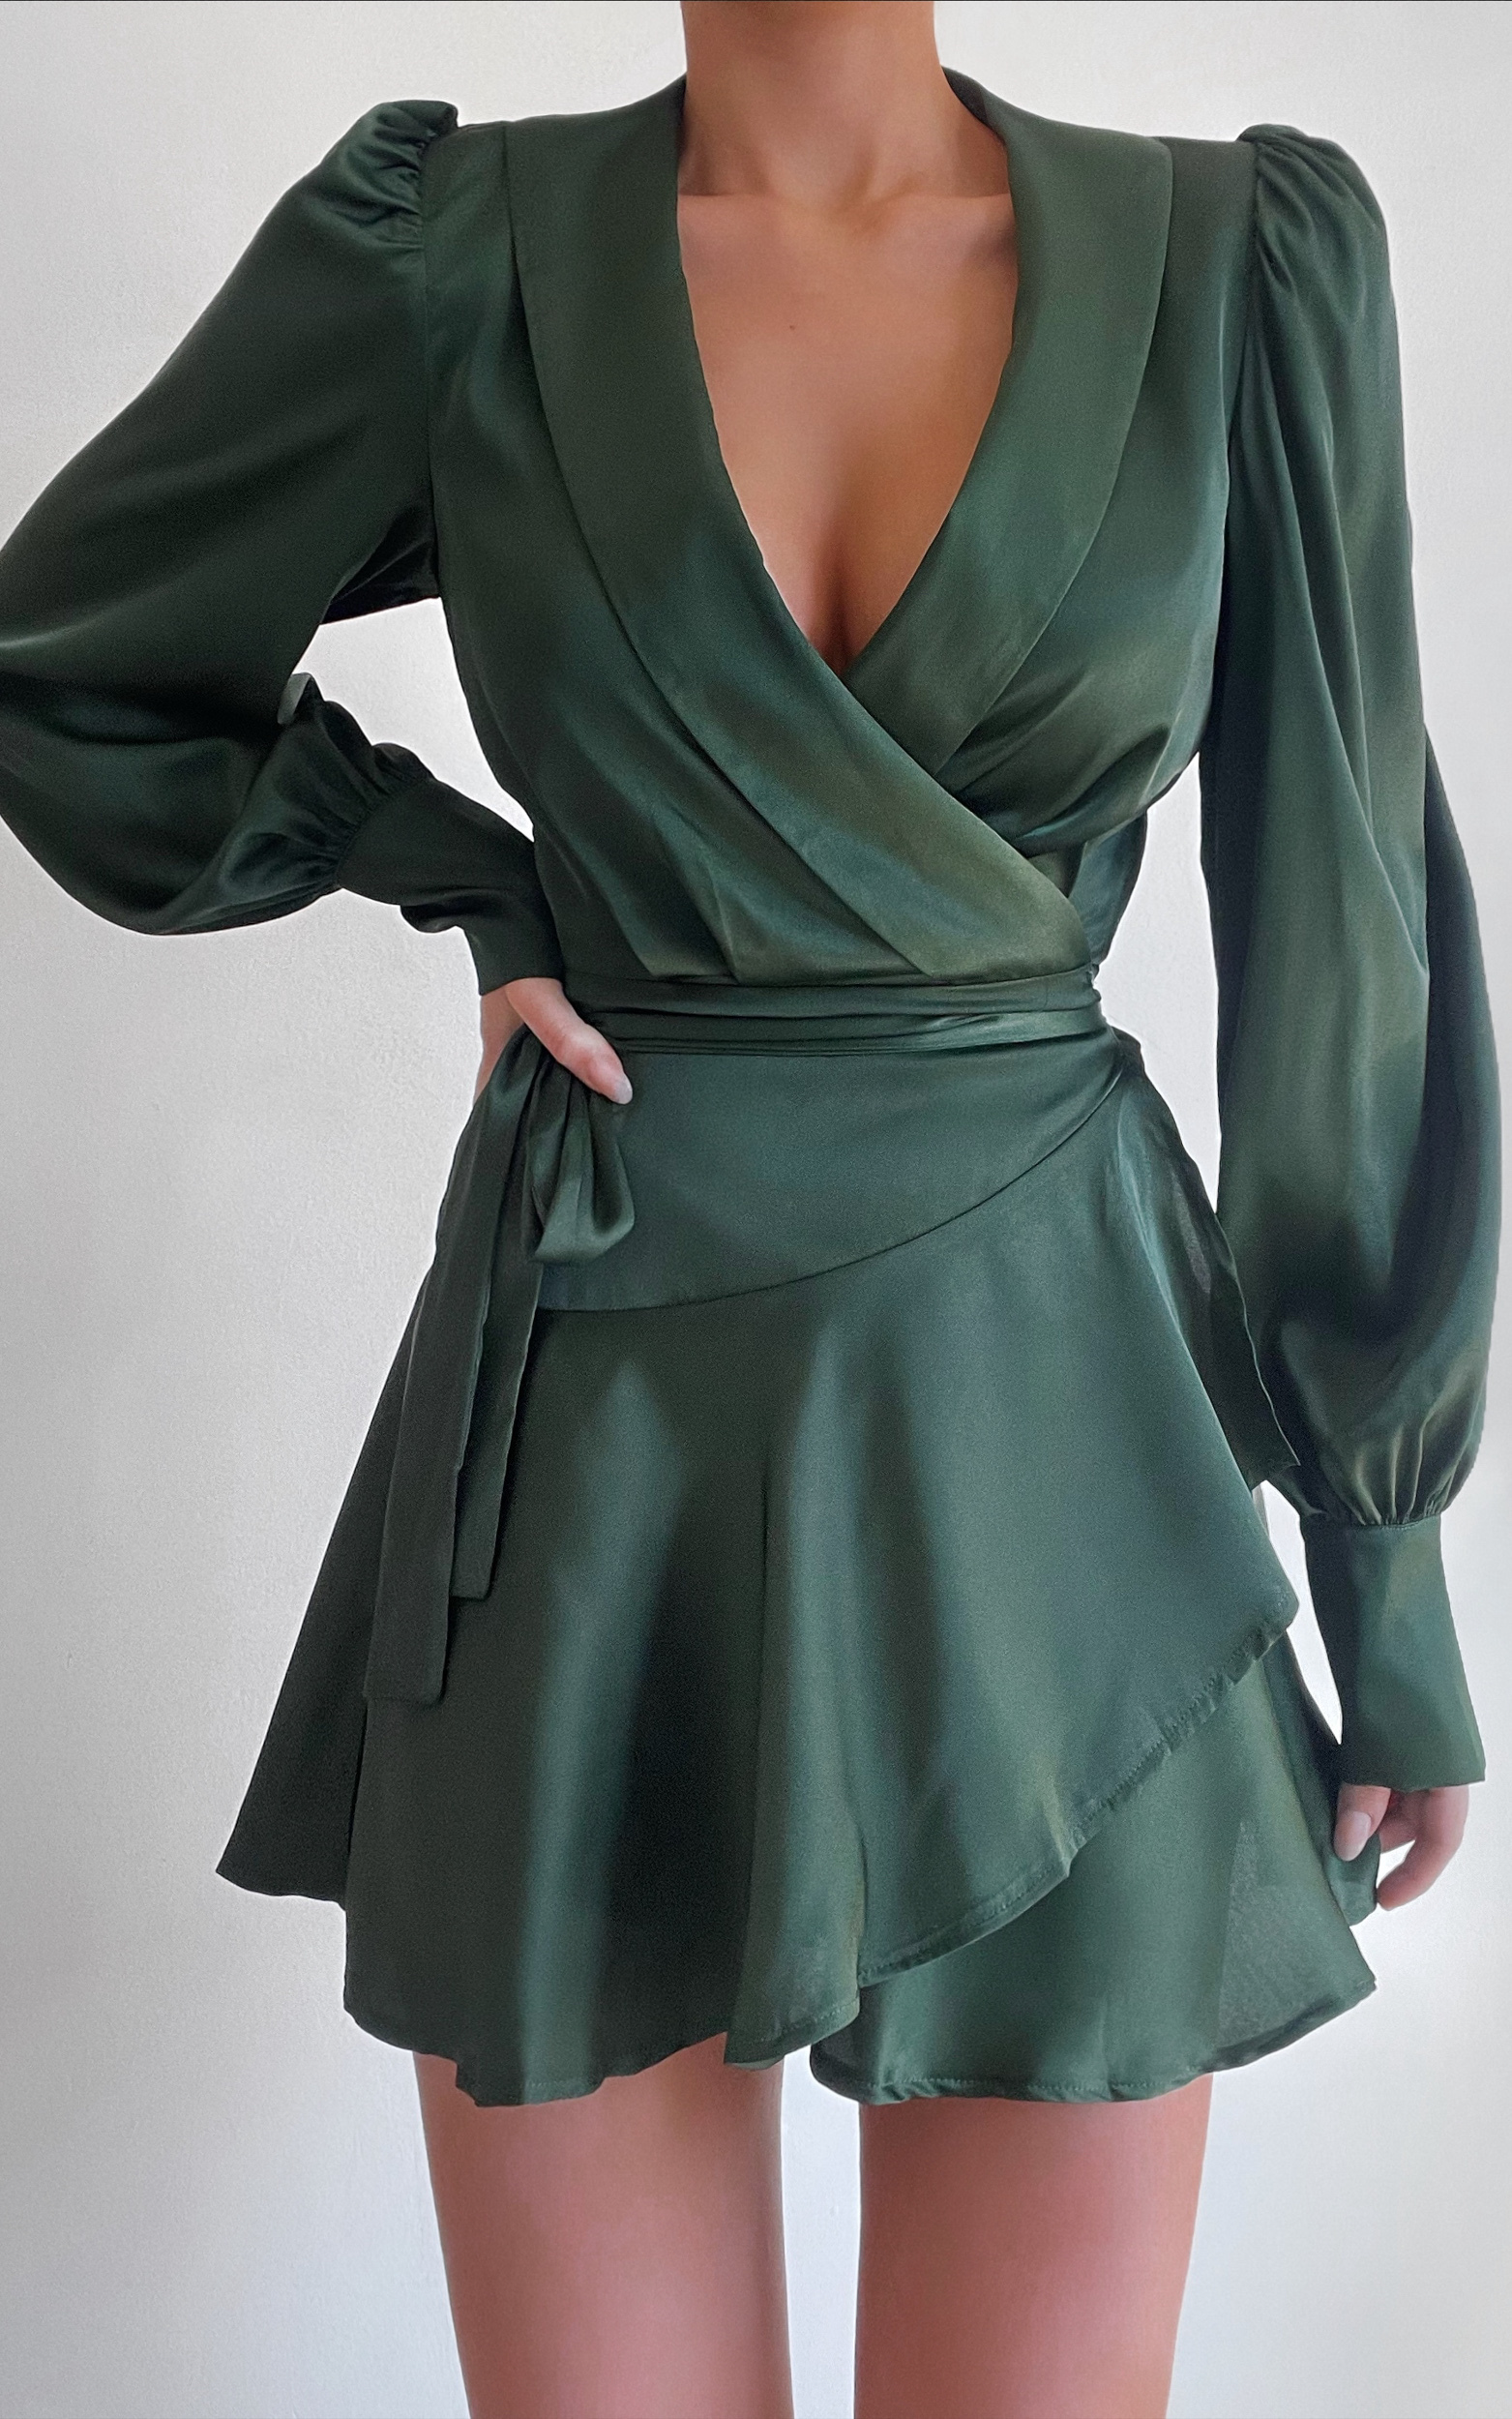 Breeana Wrap Mini Dress in Forest Green - 04, GRN3, hi-res image number null